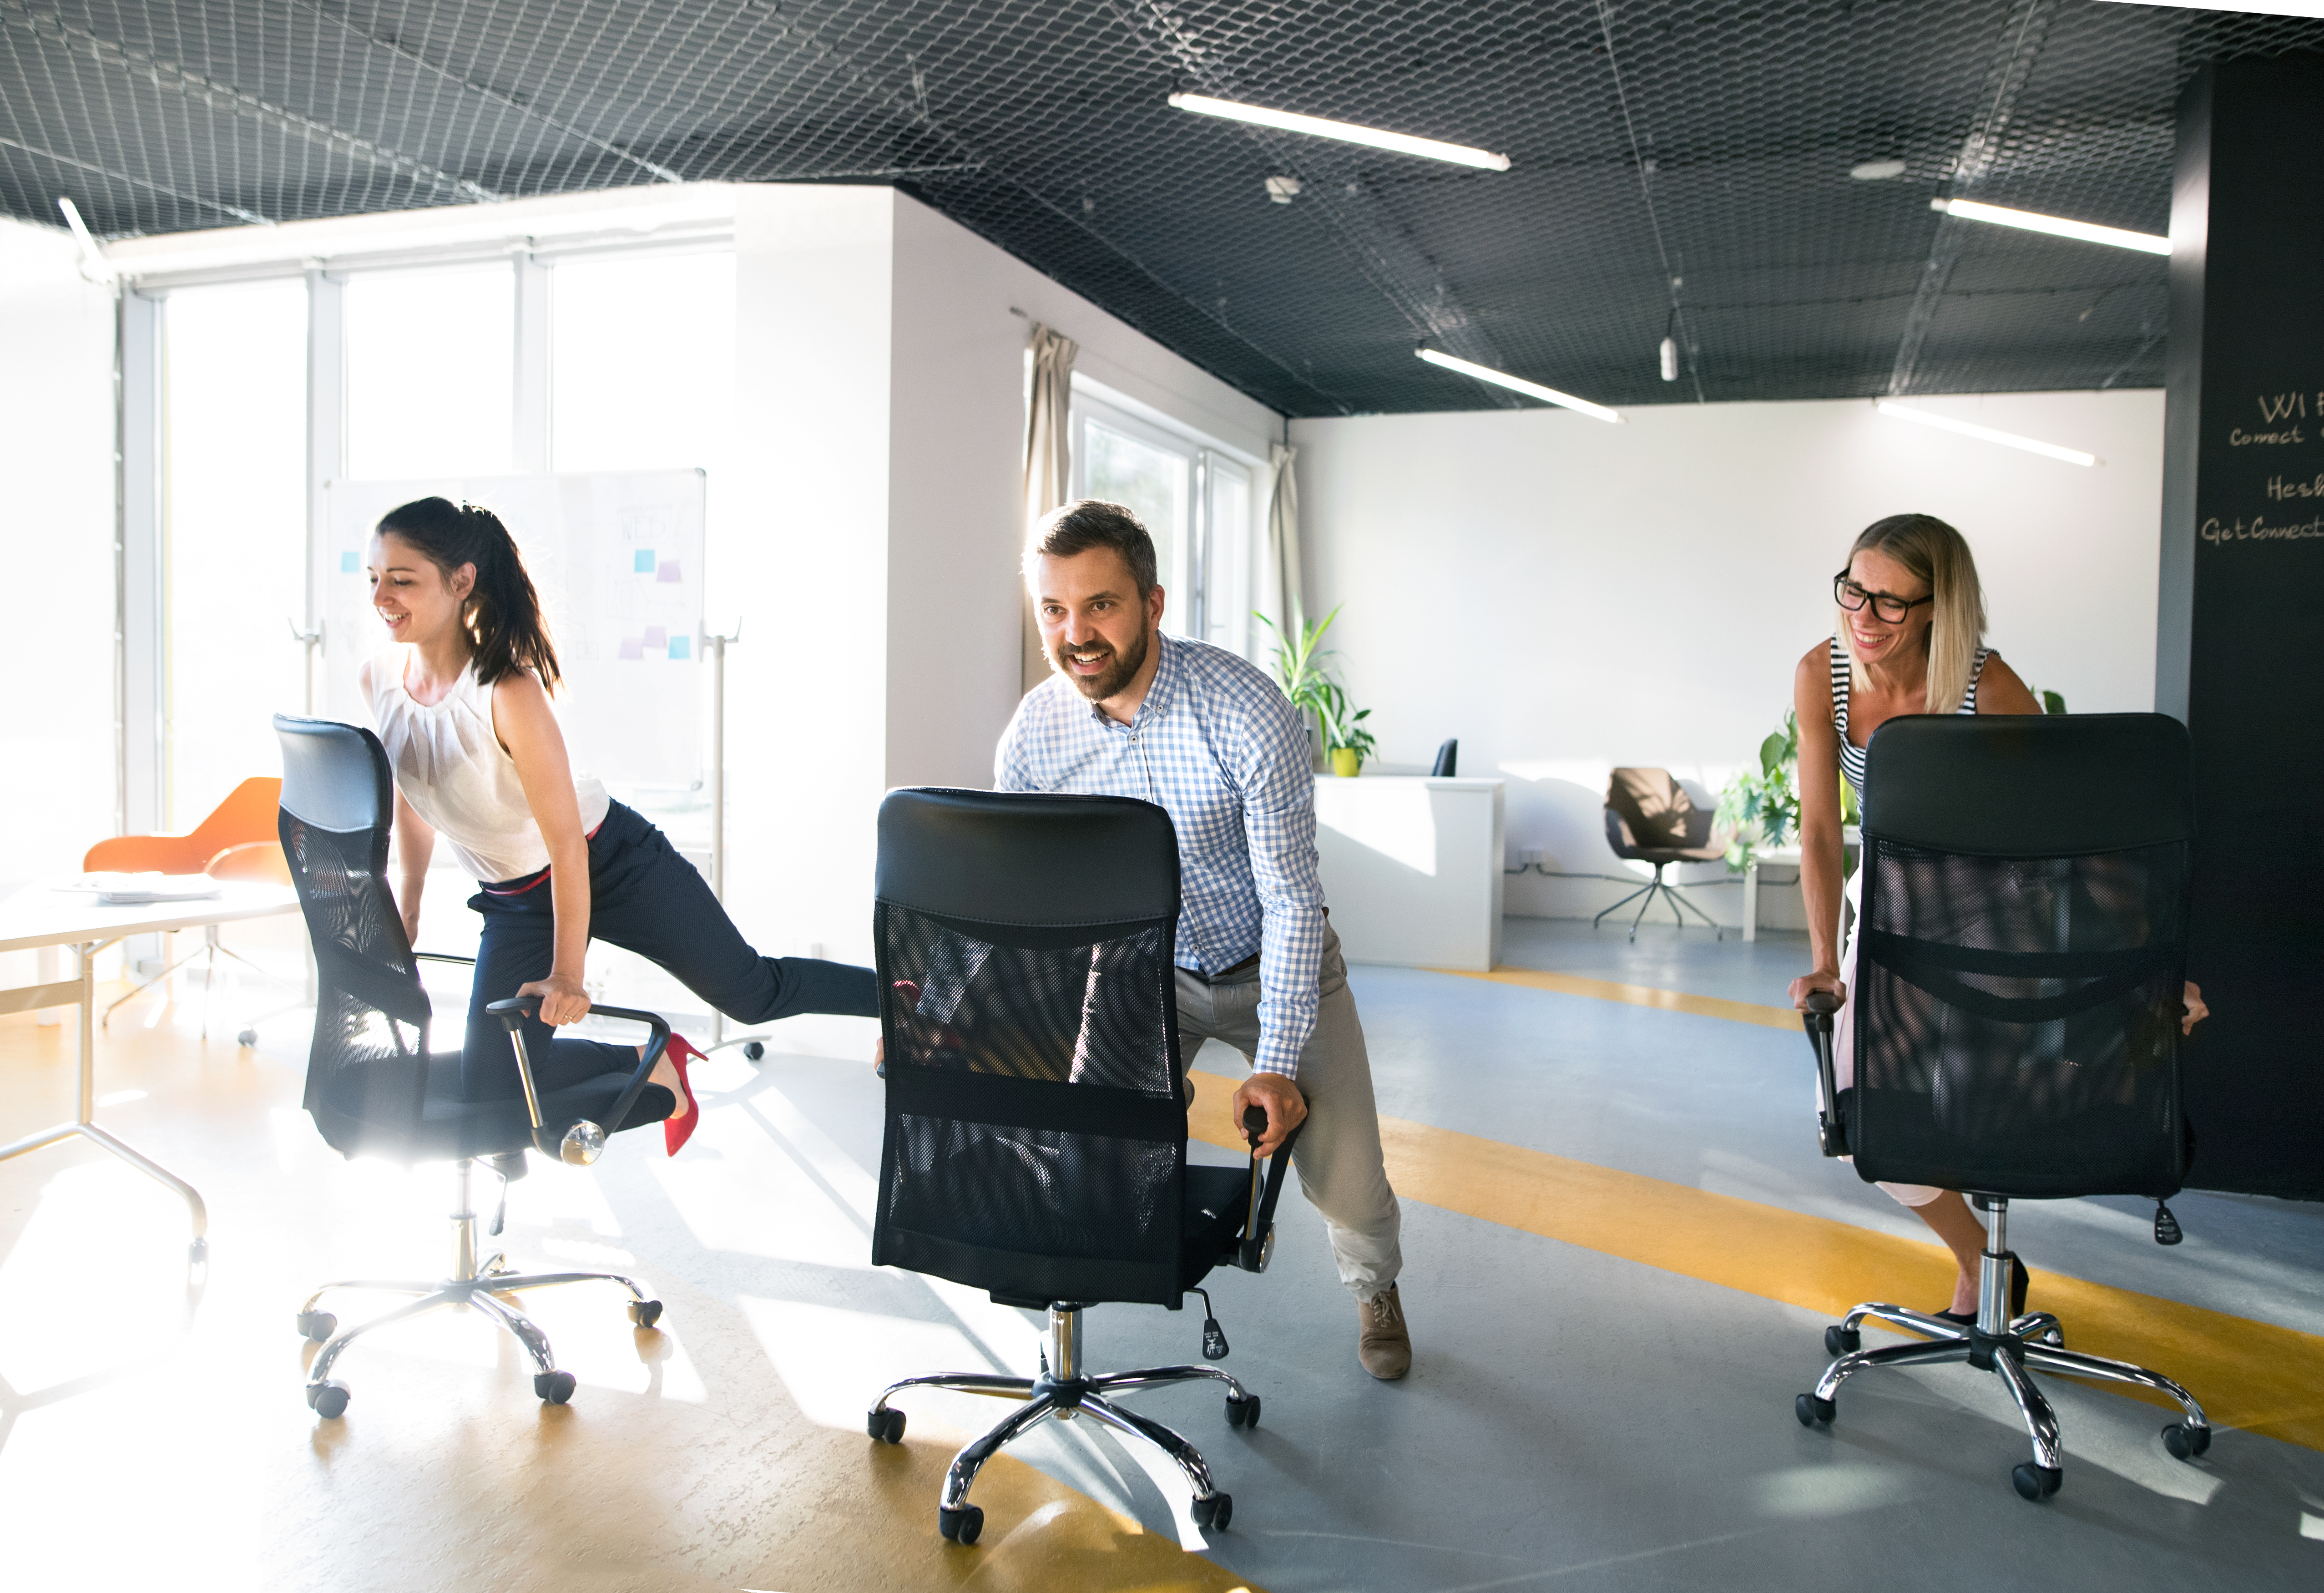 Canva - Business People Riding a Chair and Racing